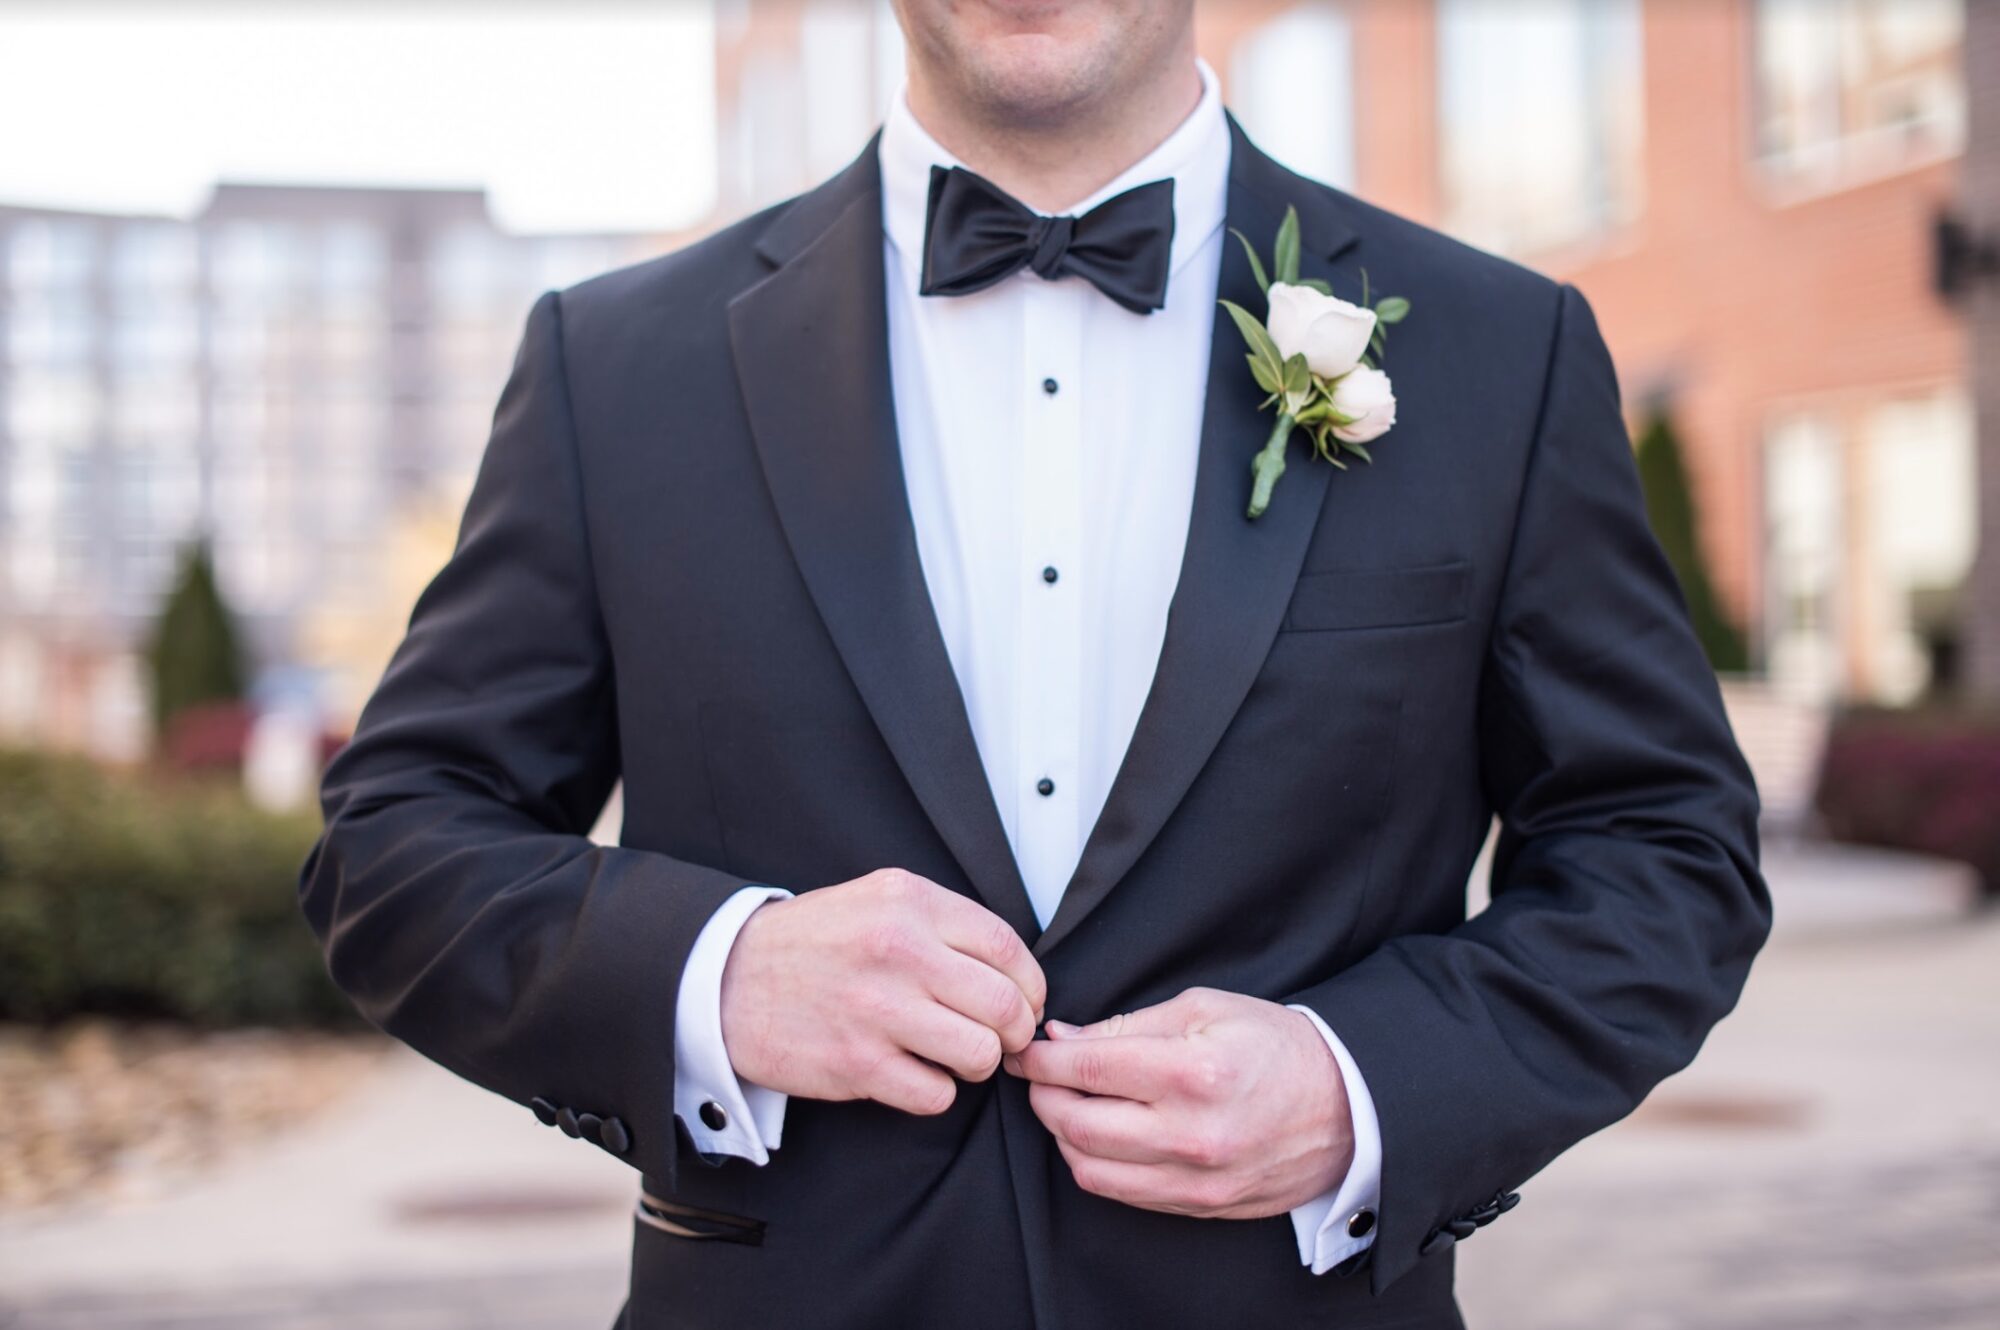 Helpful Tips on What to Wear to a Winter Wedding (for Men)